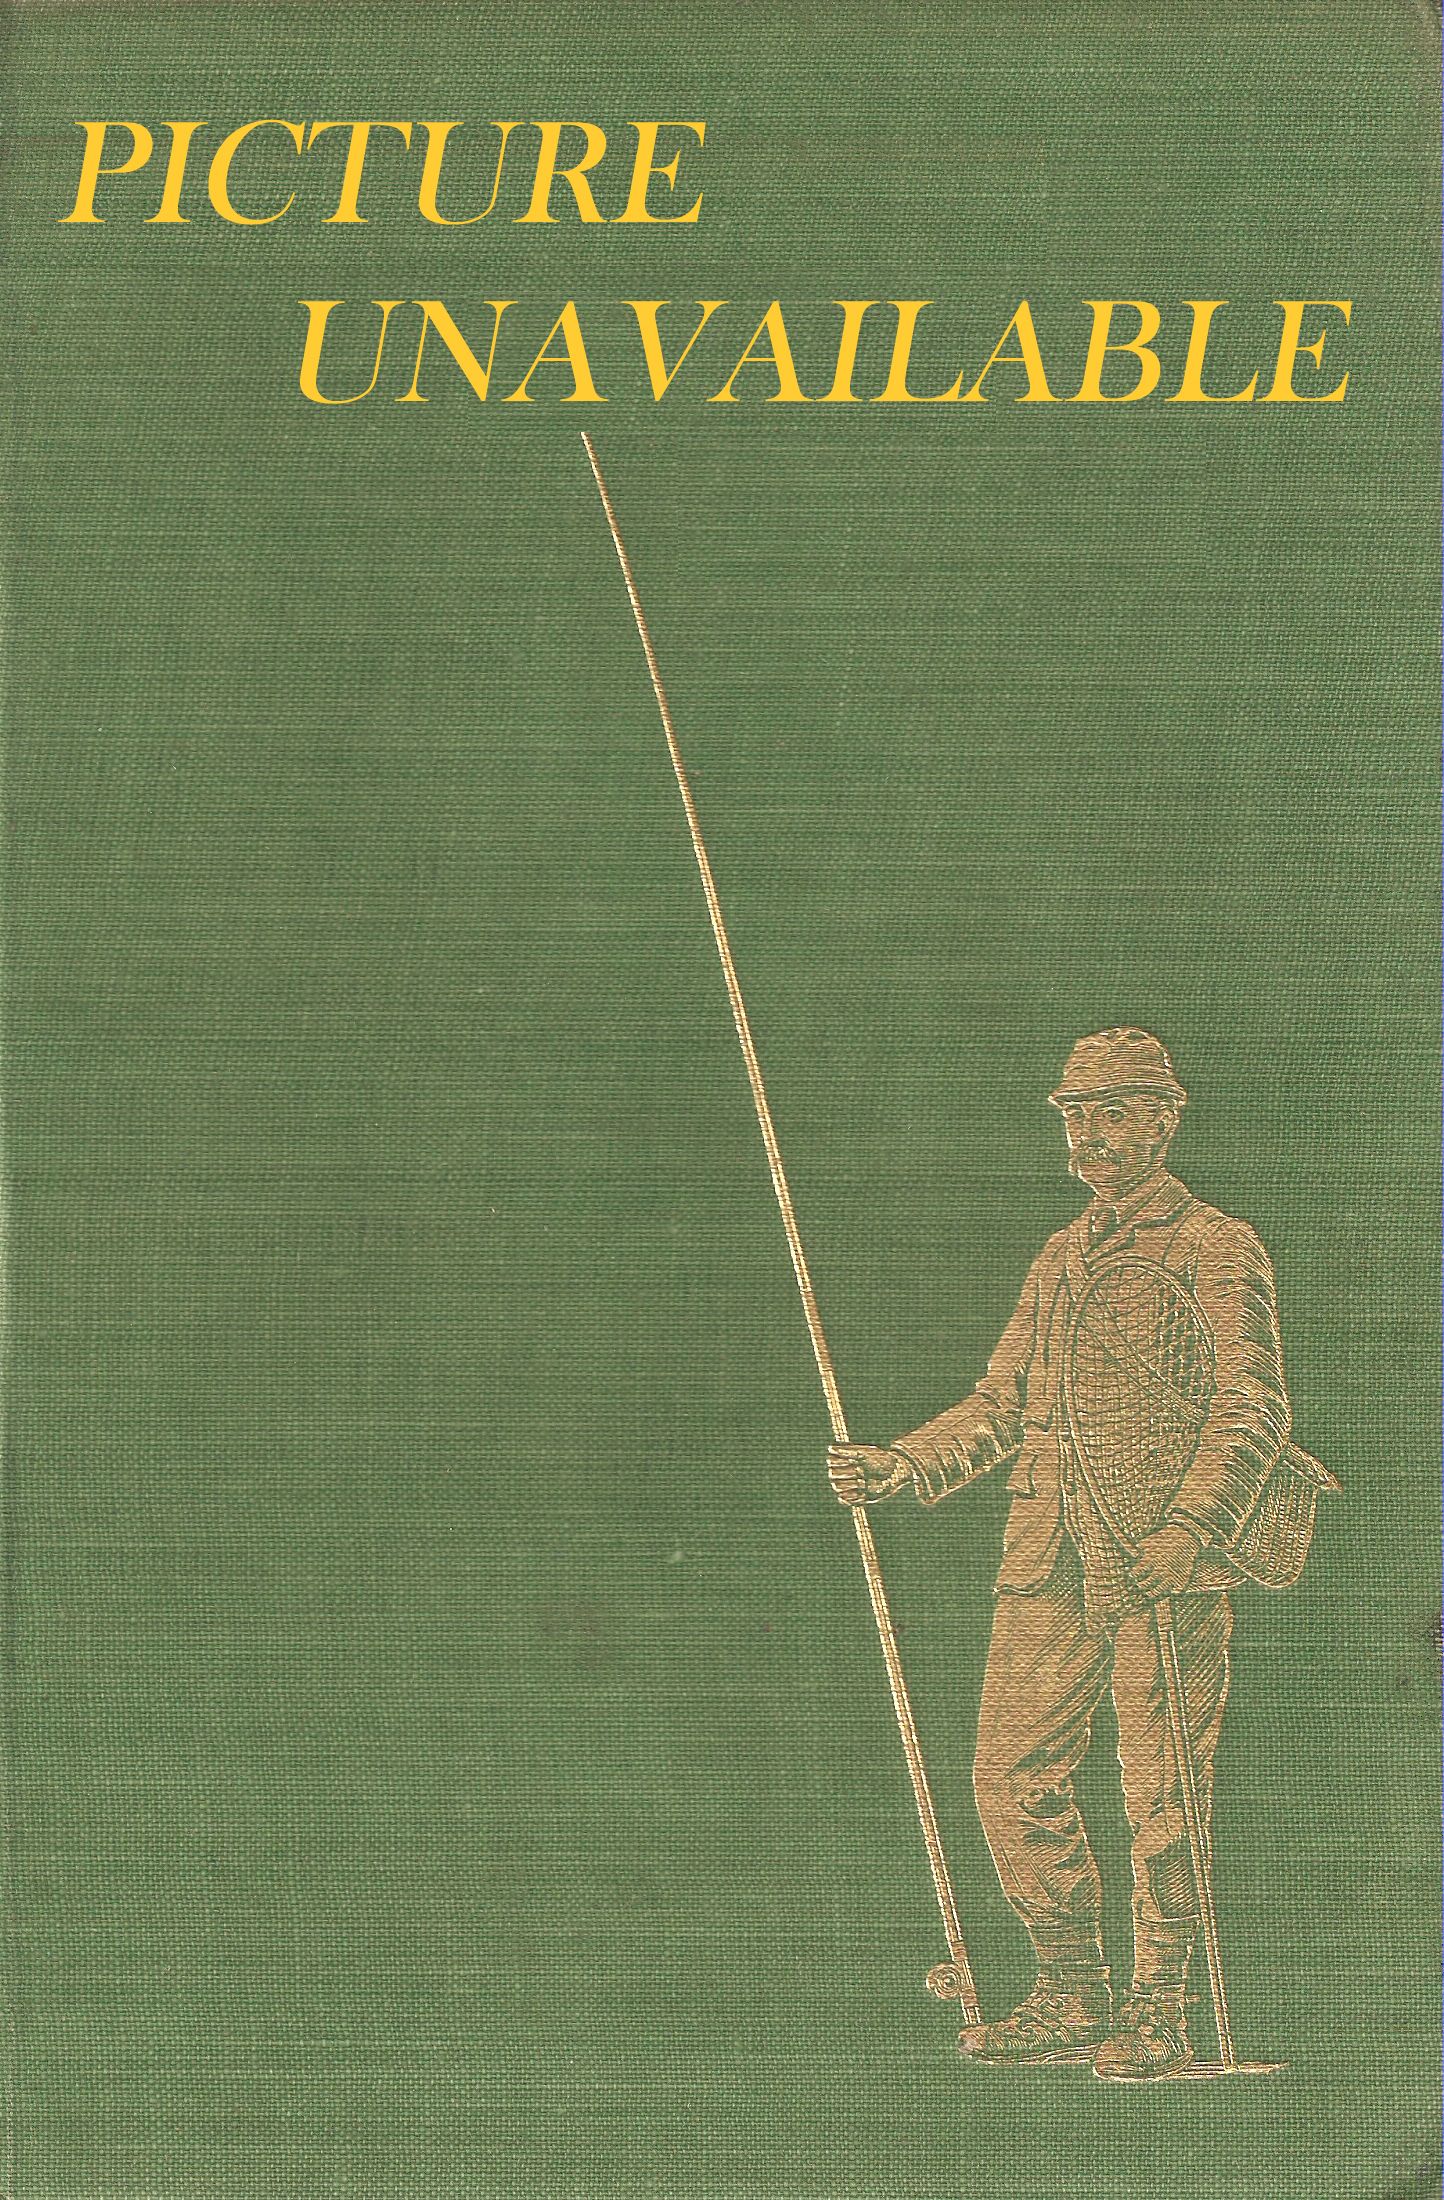 ROD FISHING IN NEW ZEALAND WATERS: A DESCRIPTION OF A FISHERMAN'S PARADISE  WITH ITS TEEMING LAKES, RIVERS and SEAS, THE STORY OF THE INTRODUCTION OF  GAME FISH and FULL INFORMATION ABOUT SPORT, EQUIPMENT, REGULATIONS and  CAMPING. By T.E. Donne C.M.G.